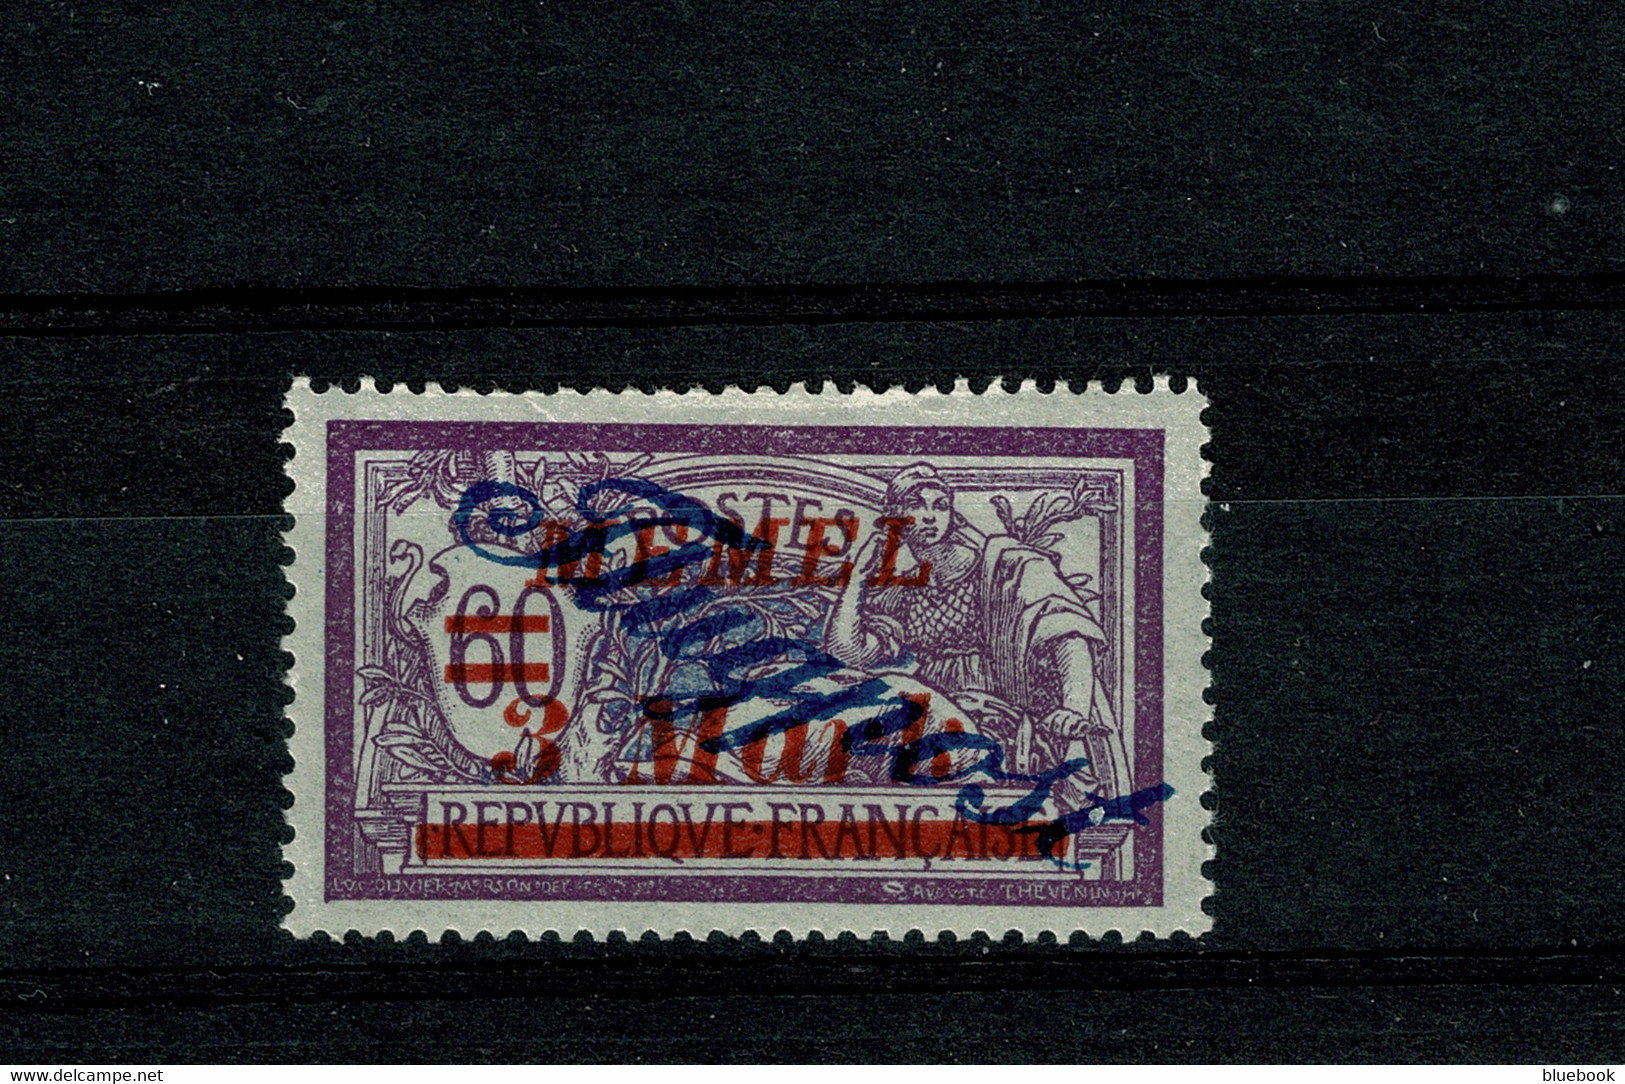 Ref 1418 - 1922 Mint France Stamp - Overprinted  Twice By Germany For Airmail & Use In Memel - Ongebruikt